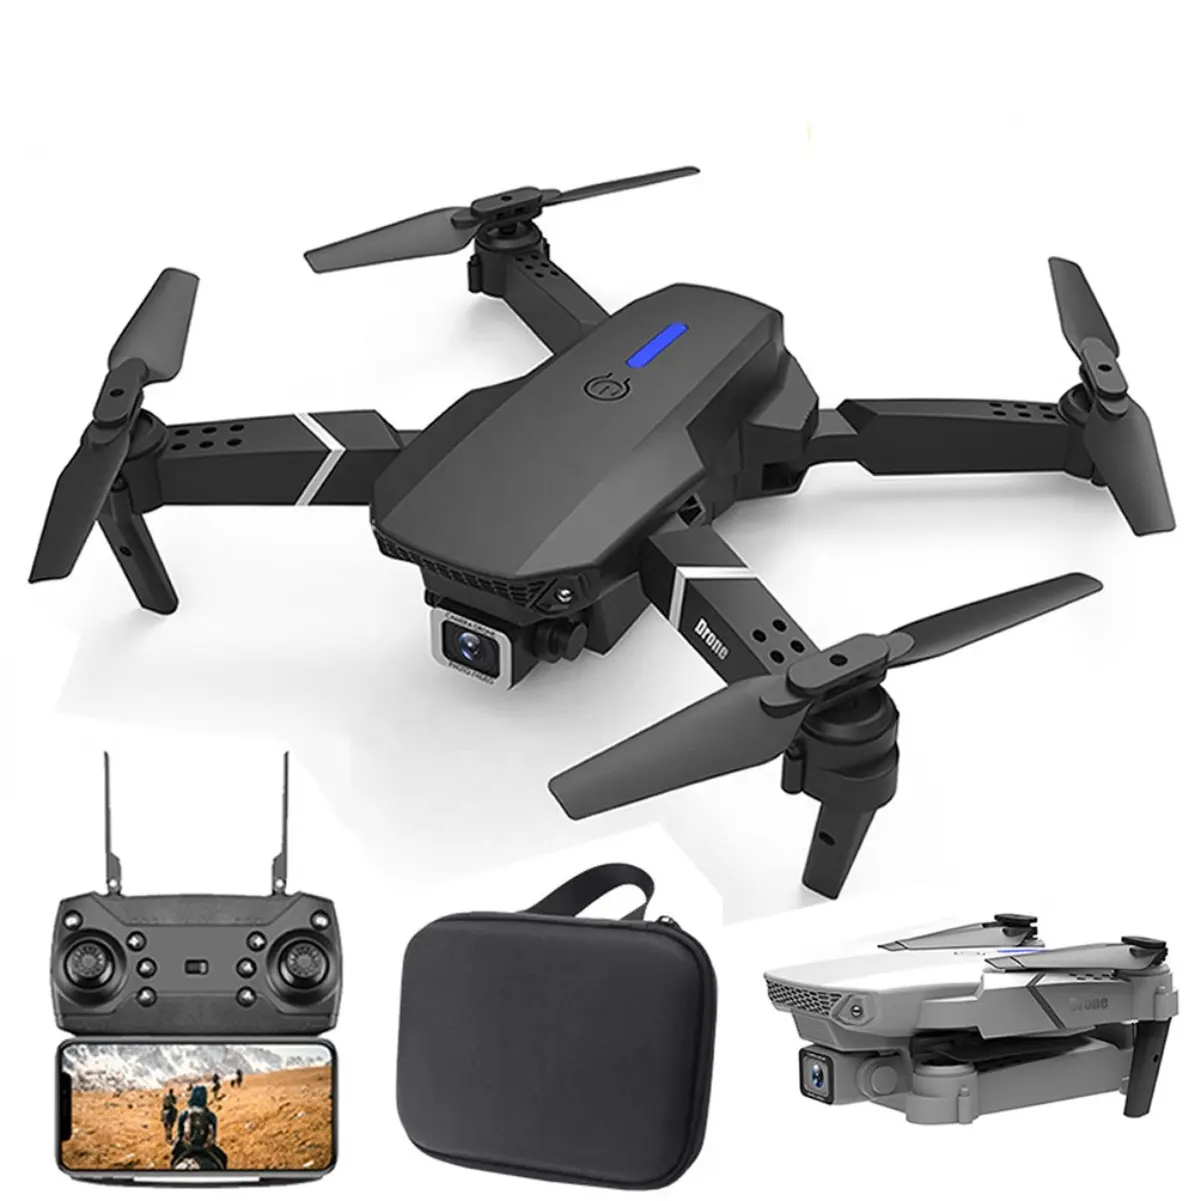 Takenoken Professional Mini E88 Drone with 4K Dual HD Camera Foldable RC Quadcopter 1080P Wifi Pro Drone Toys Helicopter